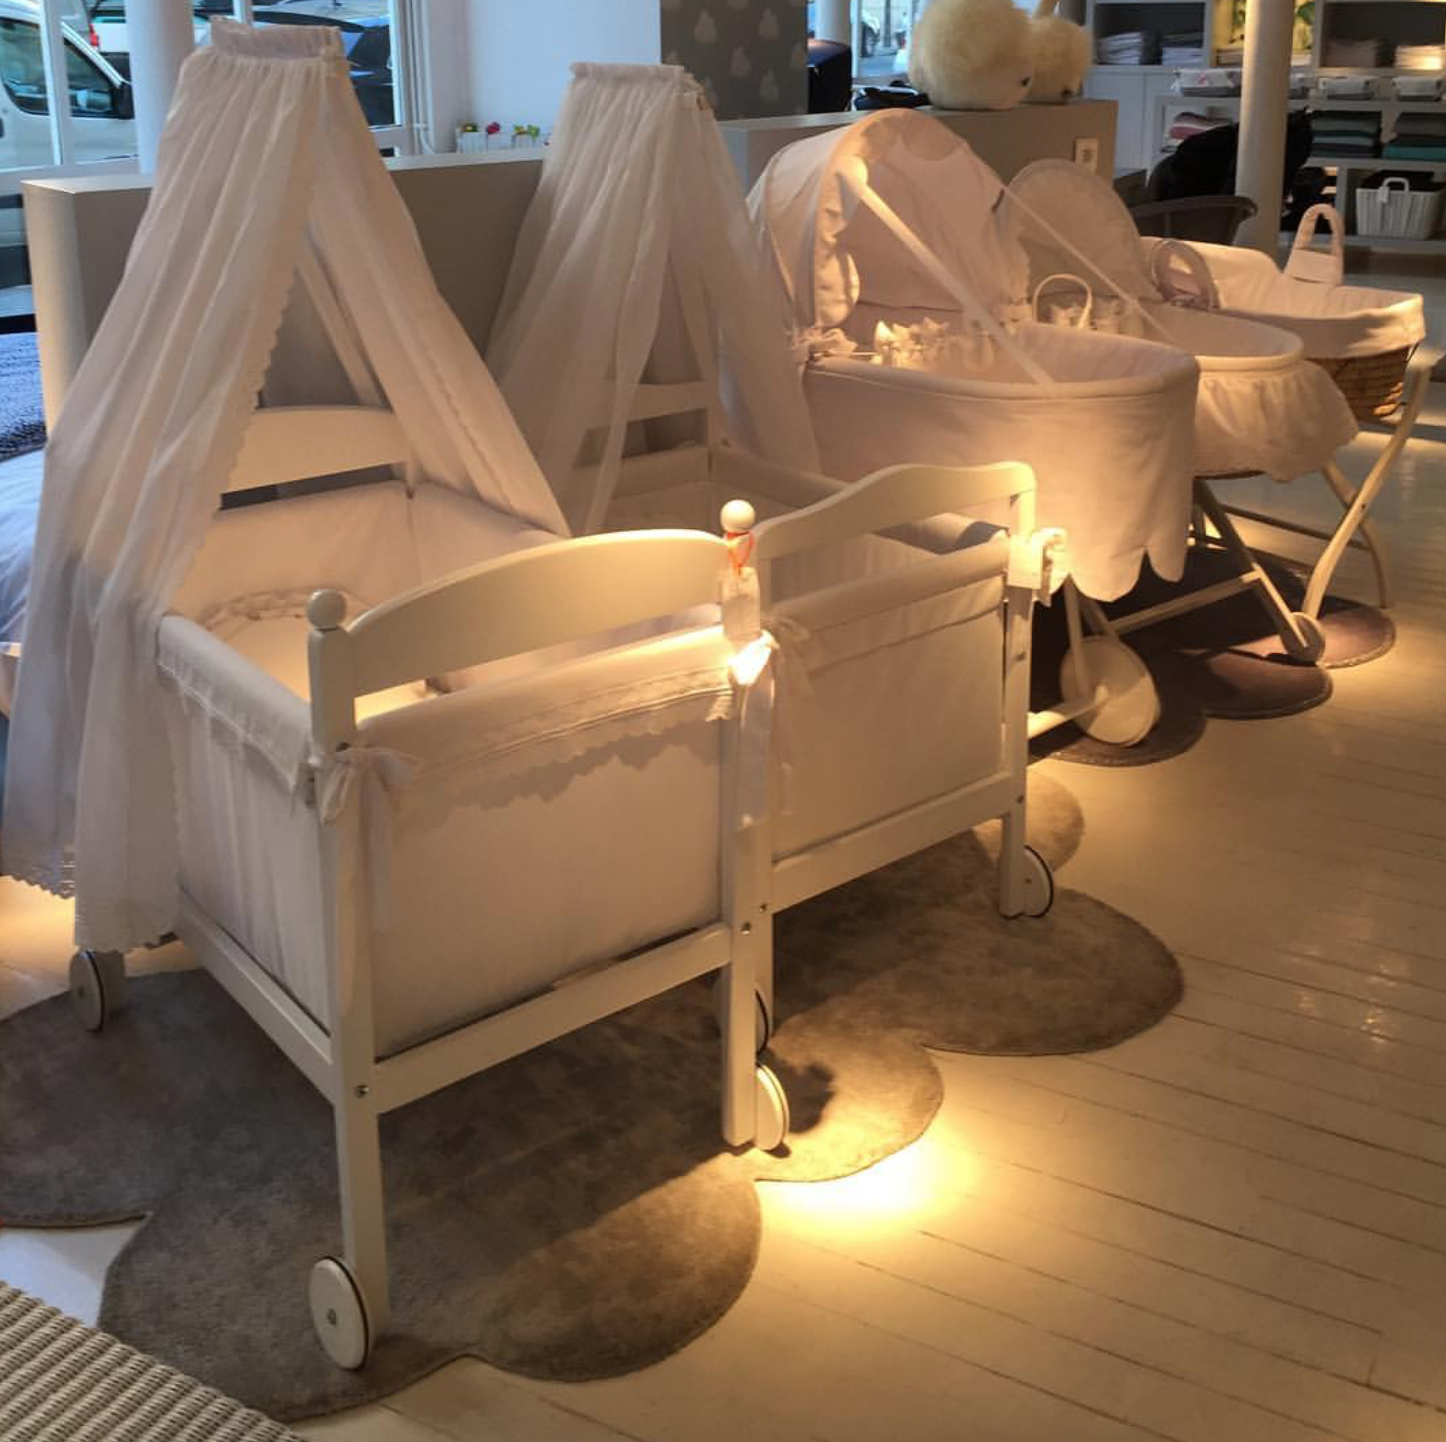 Travelling to Paris with children - Best boutiques for kids - Baudou meubles - High end Nursery decor and furniture